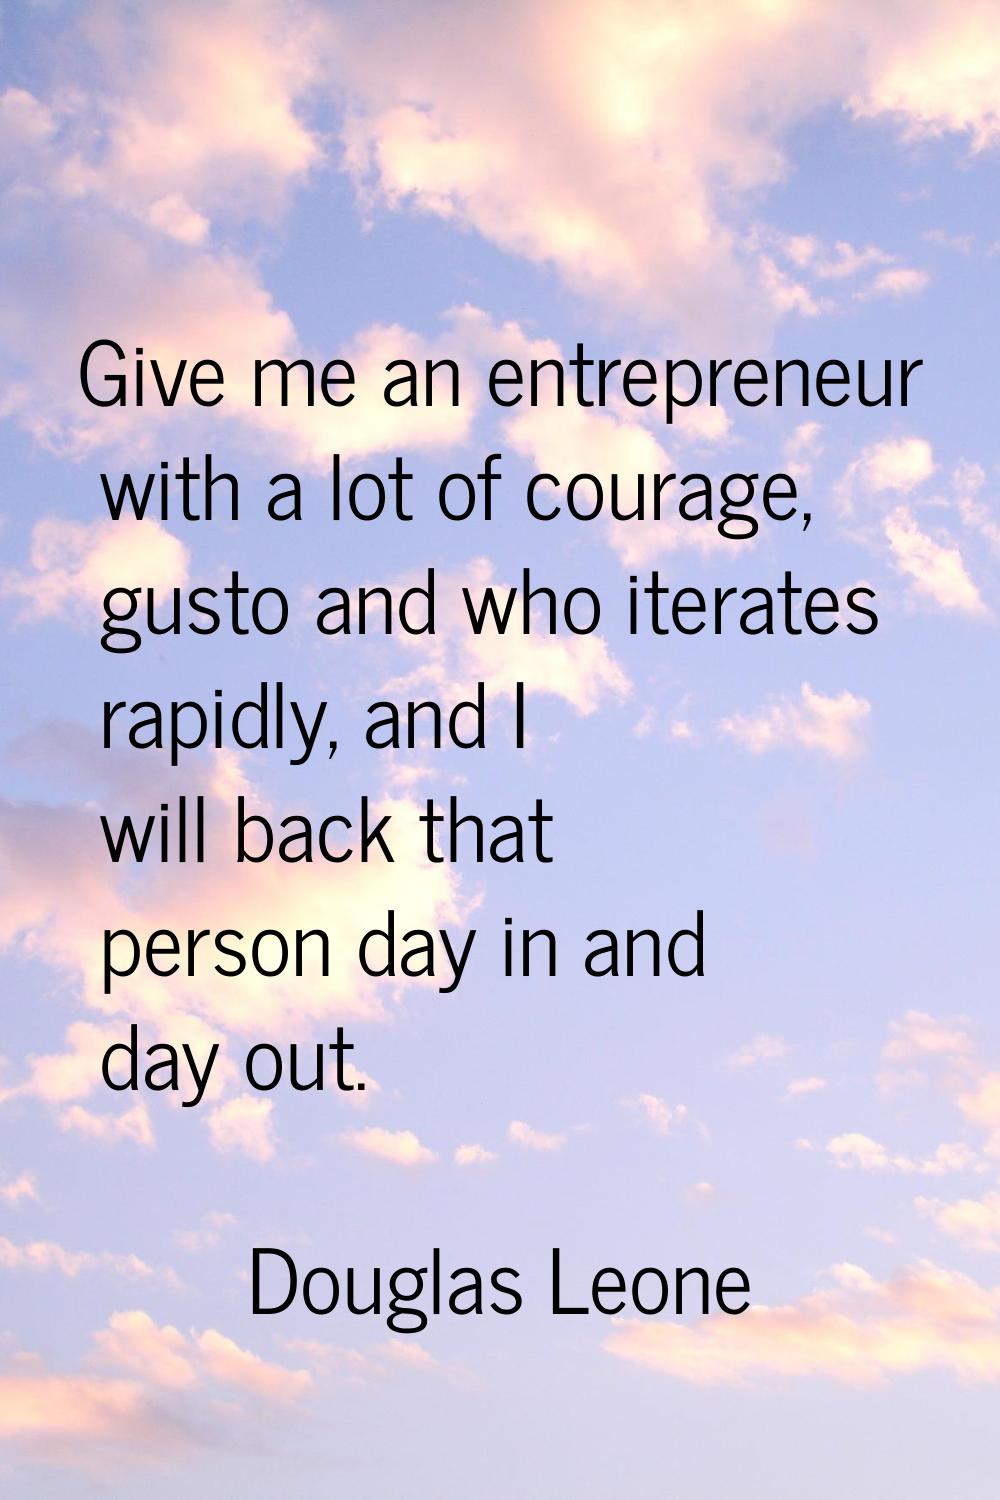 Give me an entrepreneur with a lot of courage, gusto and who iterates rapidly, and I will back that